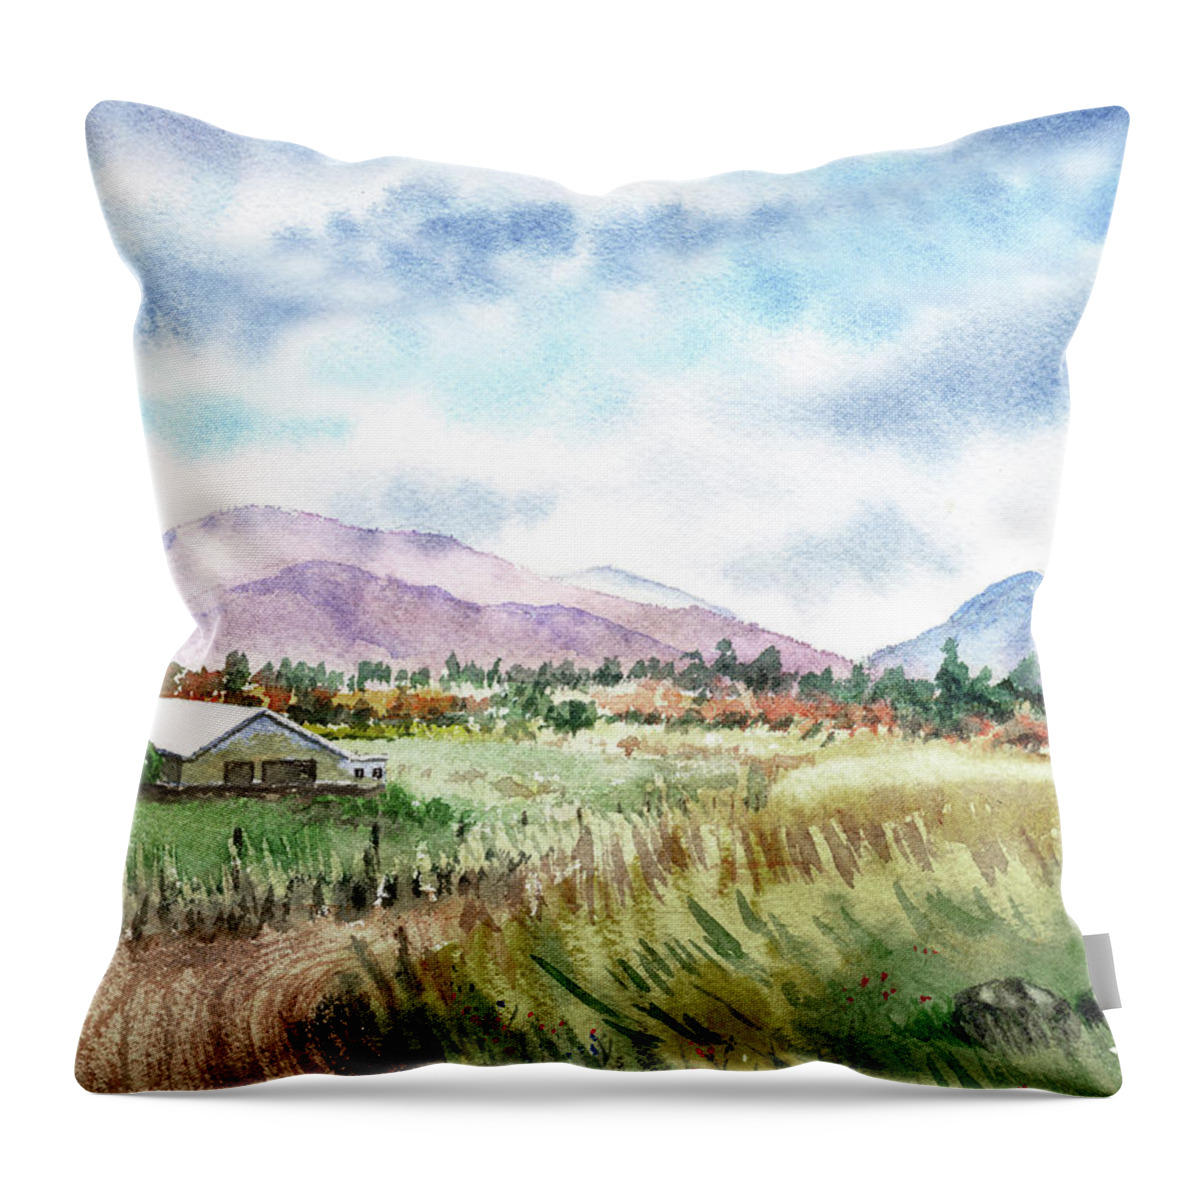 Barn Throw Pillow featuring the painting Farm Barn Mountains Road In The Field Watercolor Impressionism by Irina Sztukowski